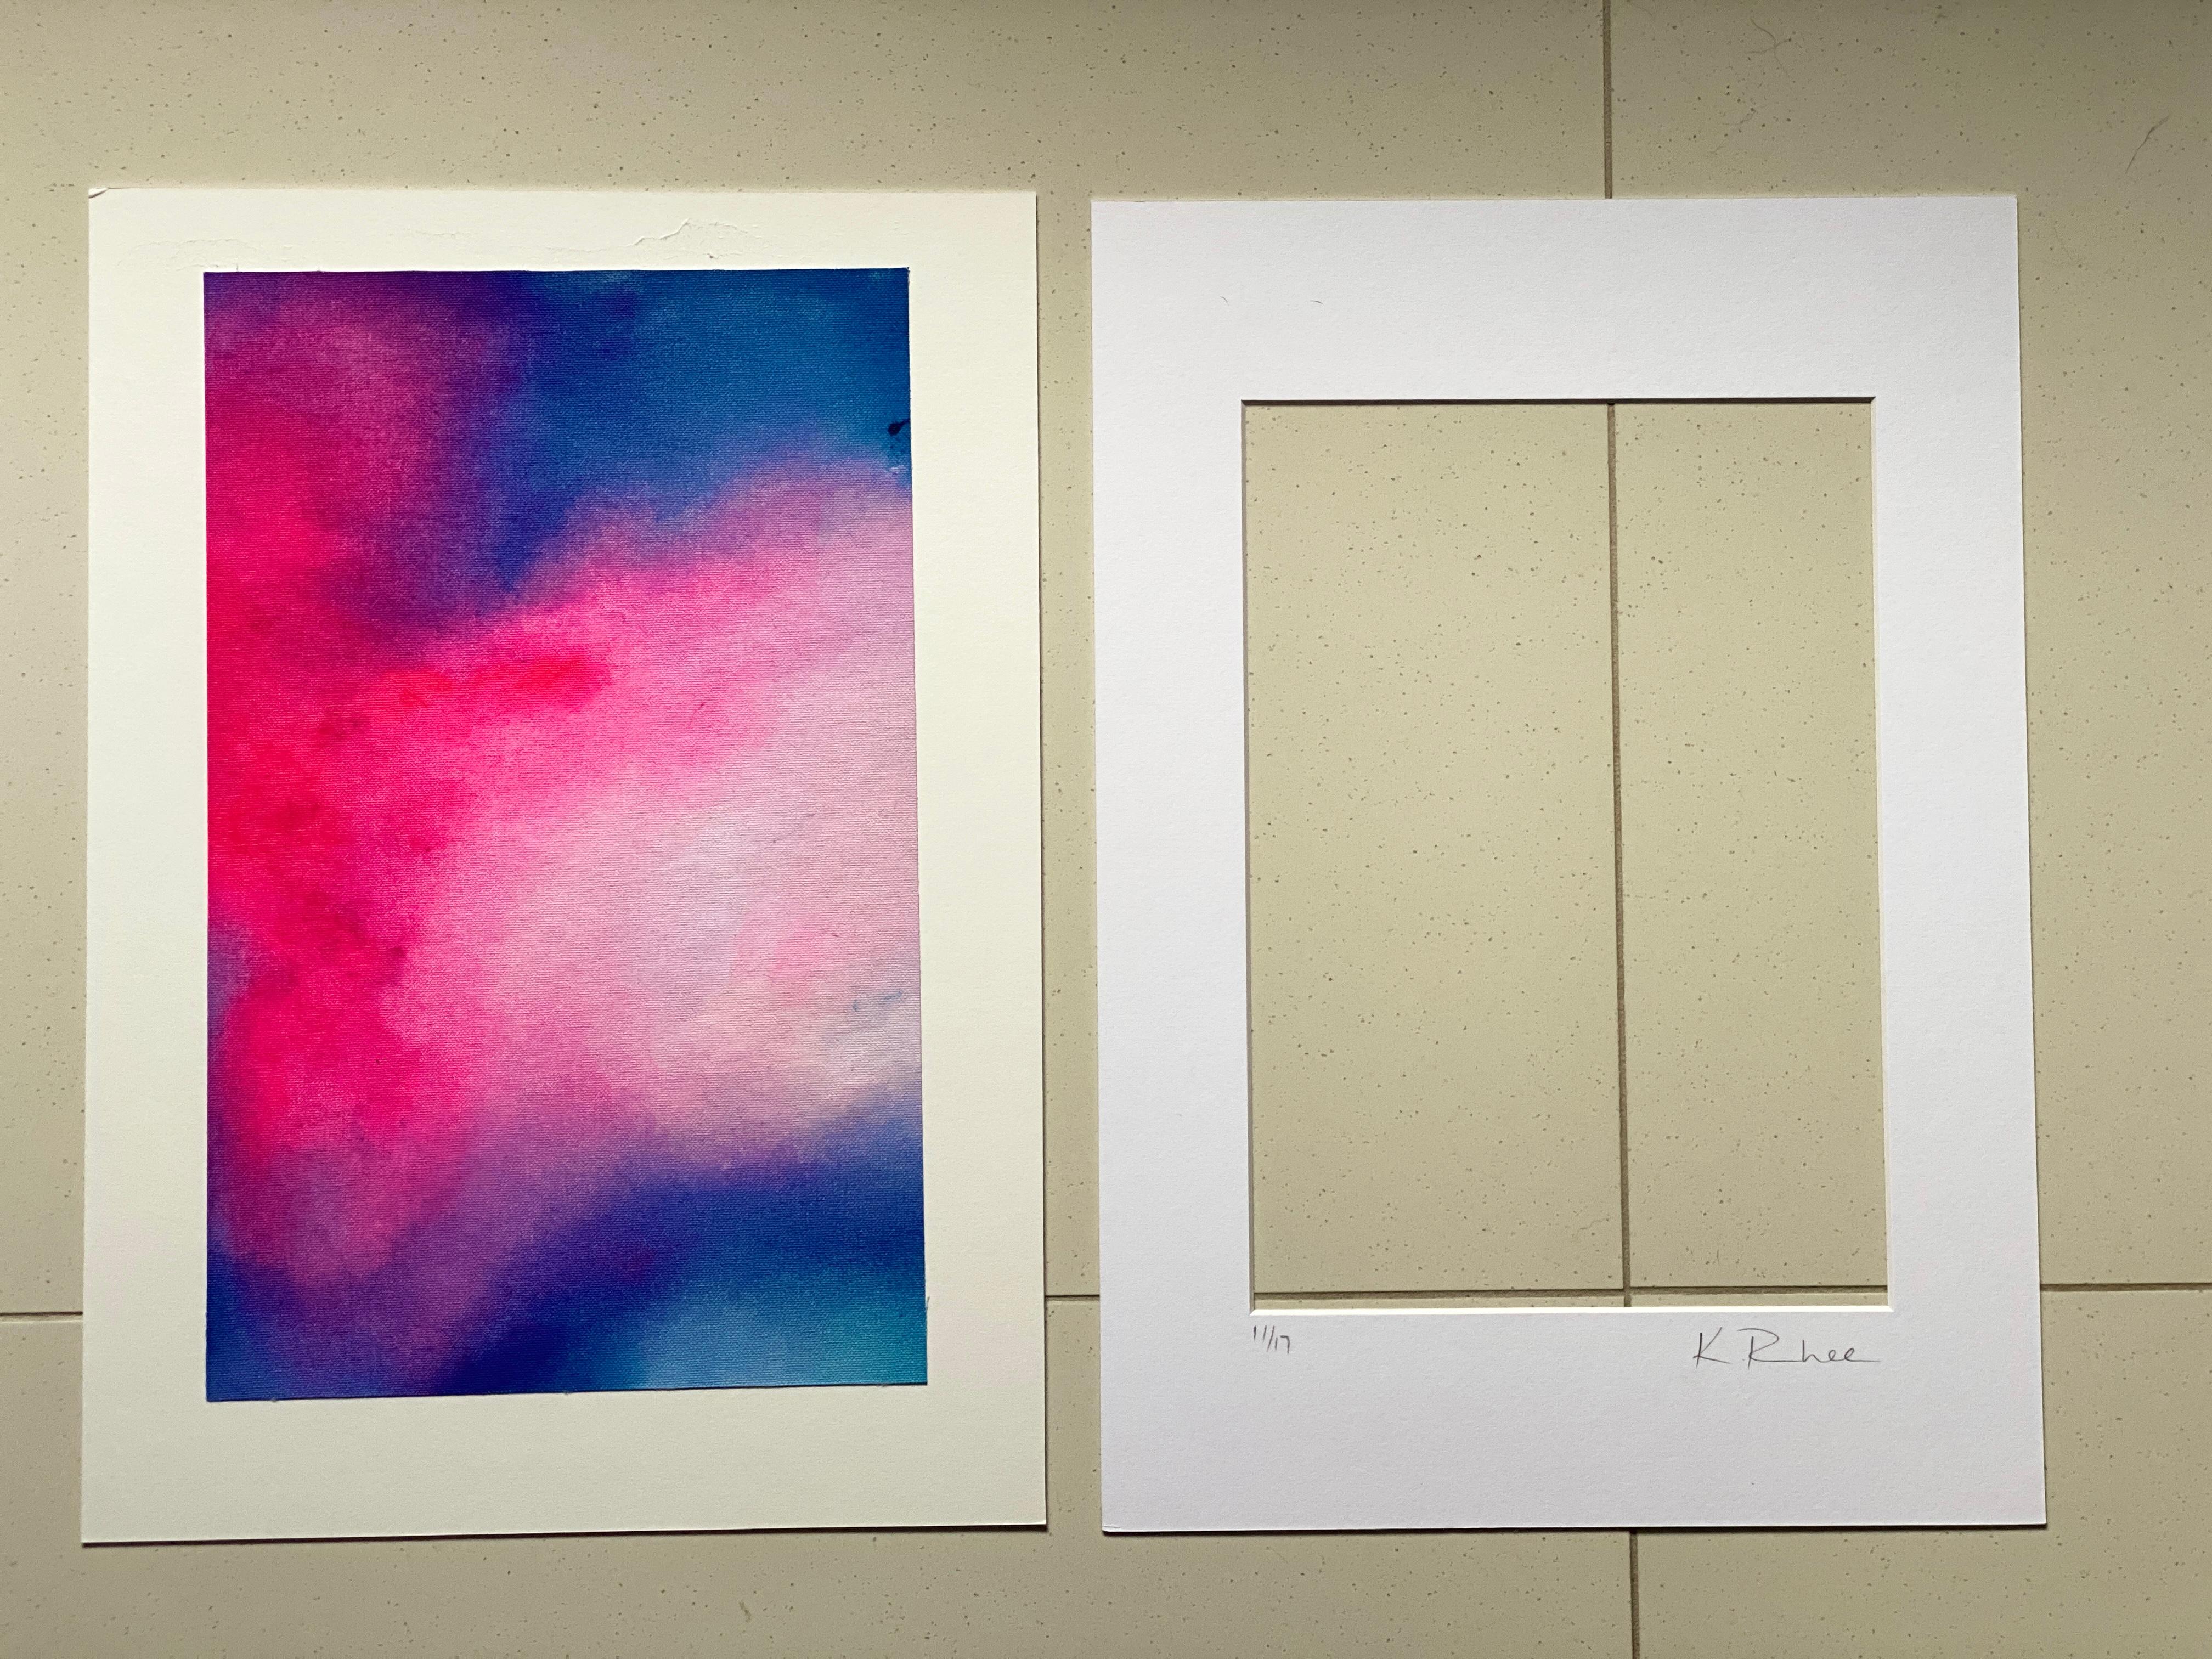 Gentle Blends Blue & Pink no2 small abstract on canvas framed in white mat board For Sale 2